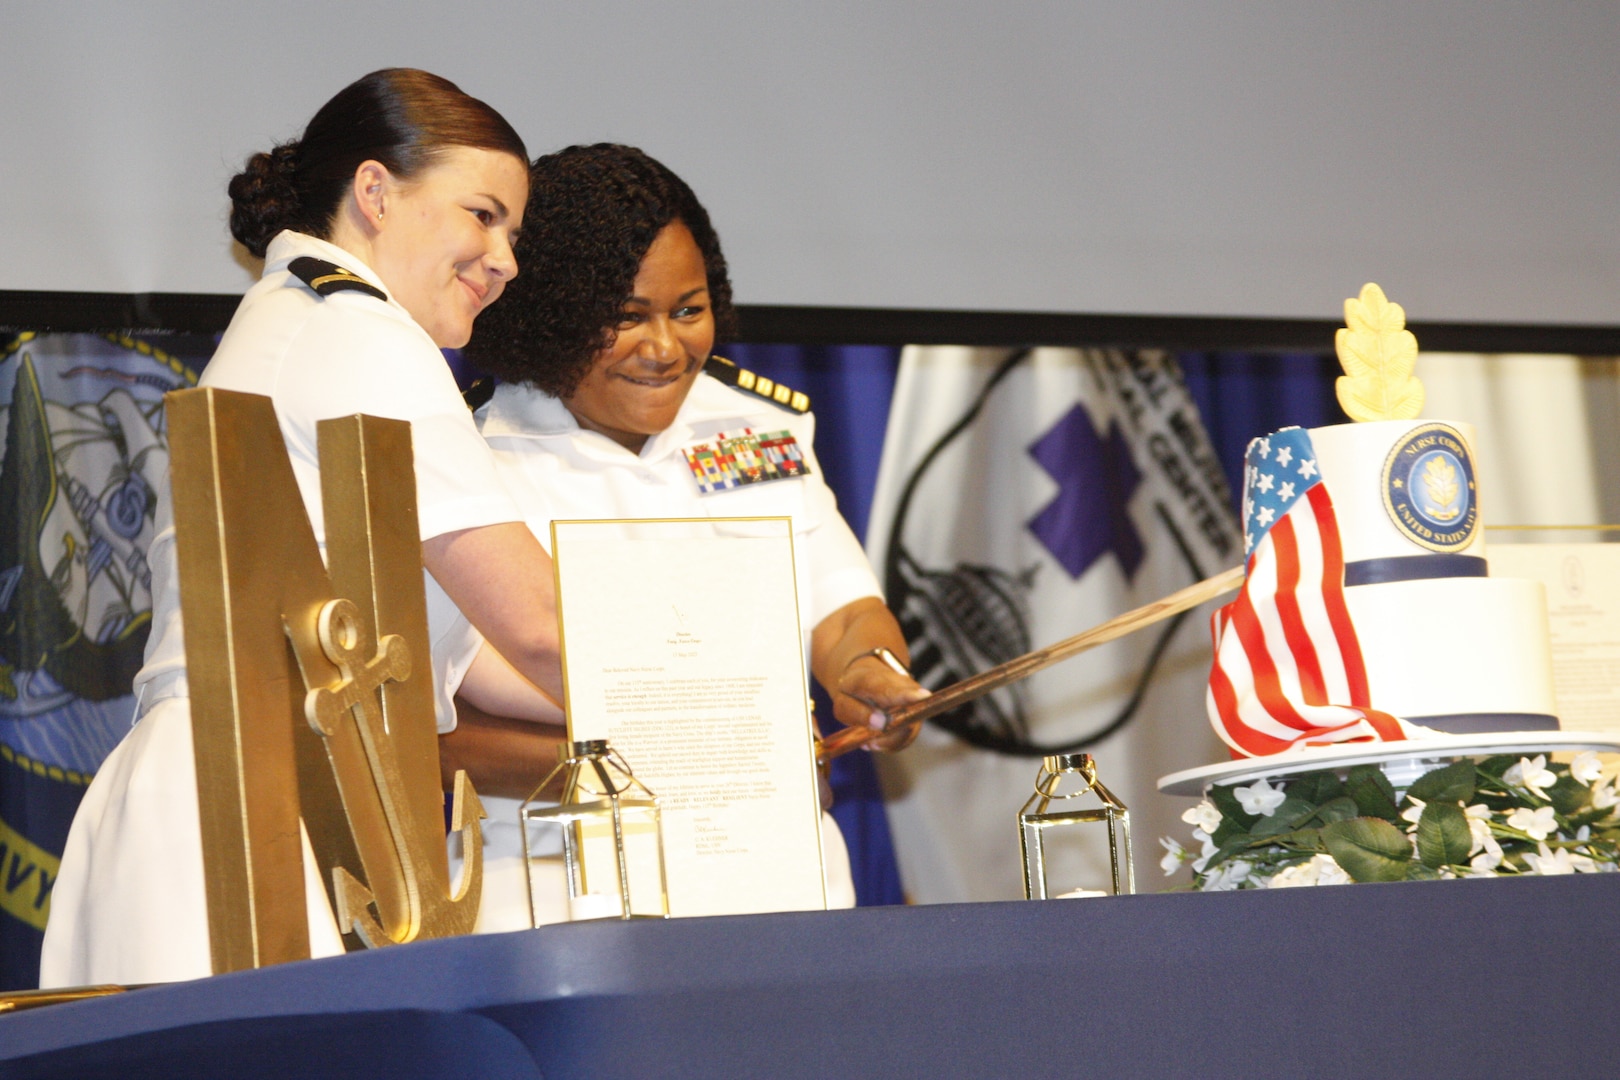 Navy Capt. Jessica Beard (right), chief nursing officer and director of nursing at Walter Reed National Military Medical Center, and Ensign Renee Boudreau, as the most senior and junior members of the corps respectively at WRNMMC, cut the 115th Navy Nurse birthday on May 12.